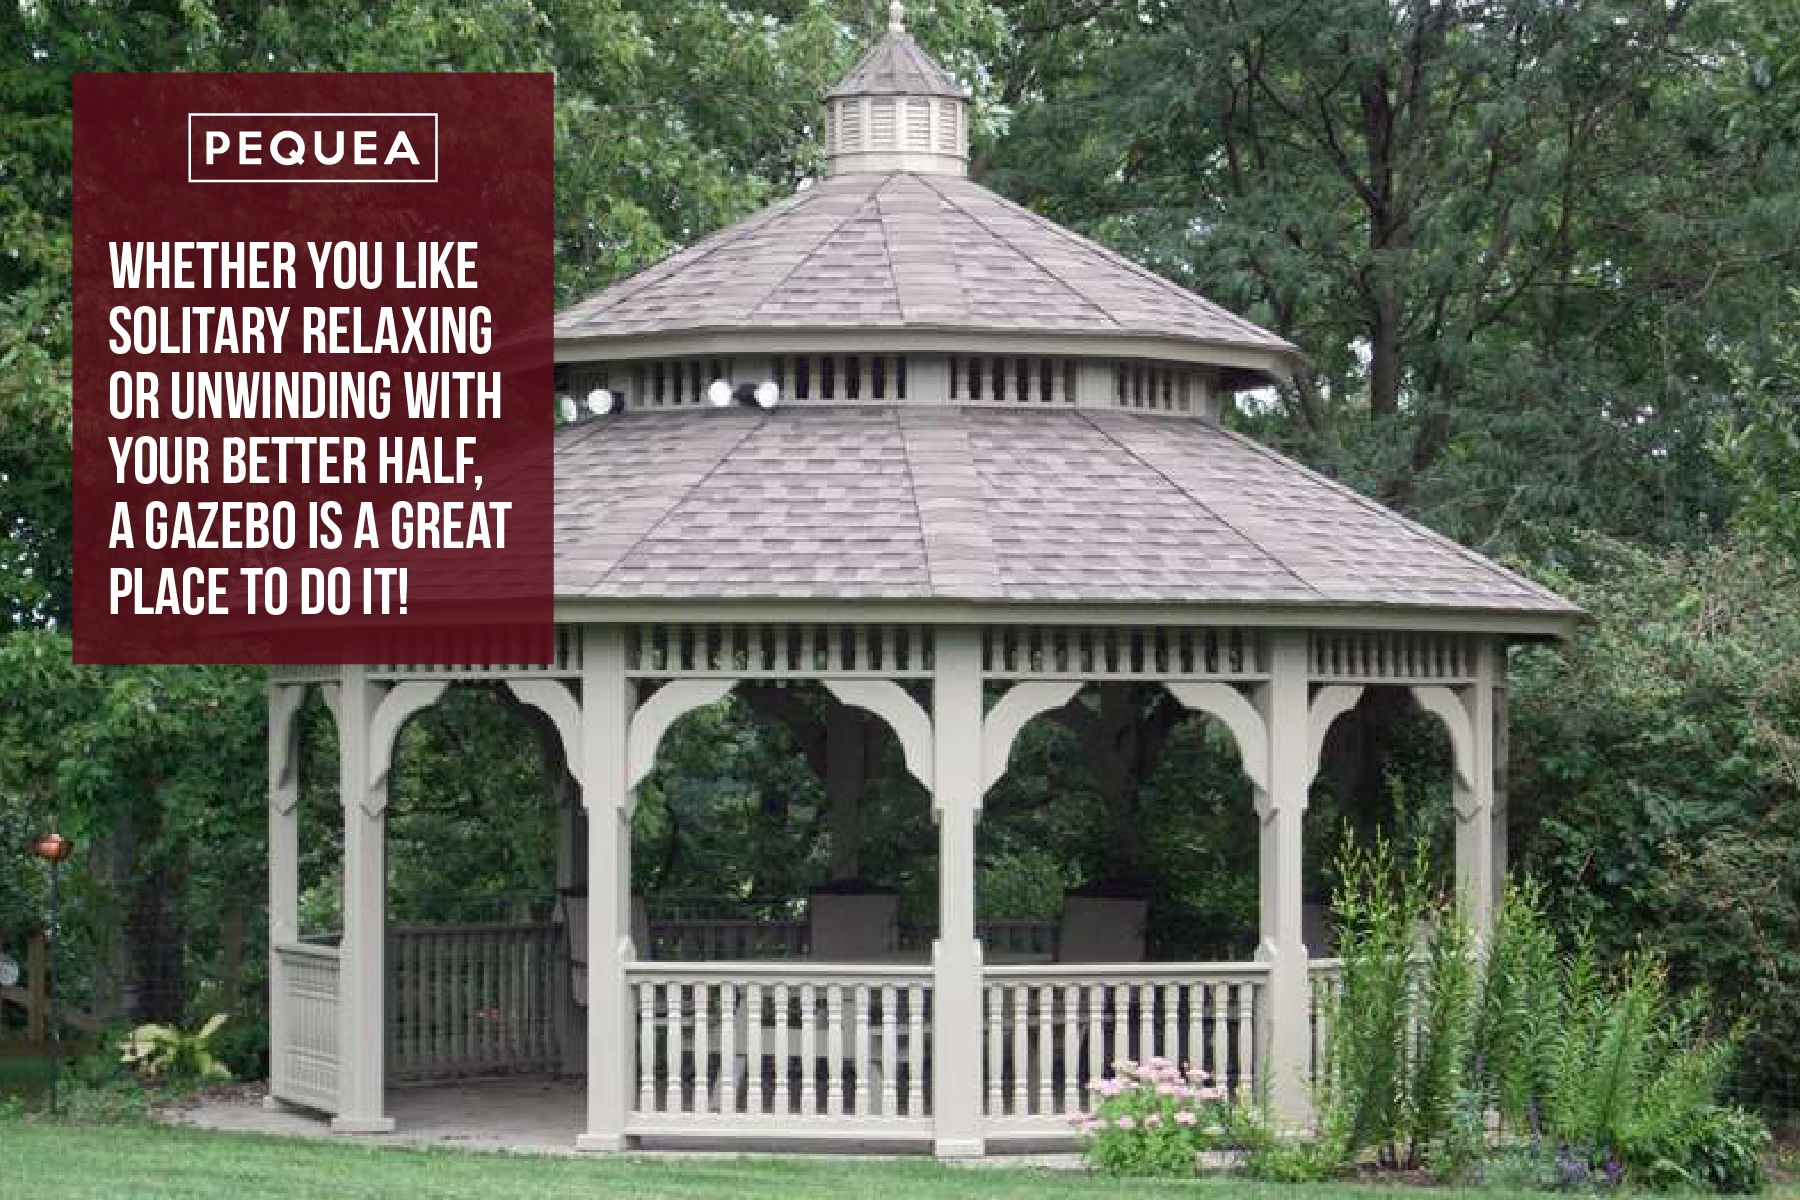 A gazebo is a great place for relaxing in your backyard